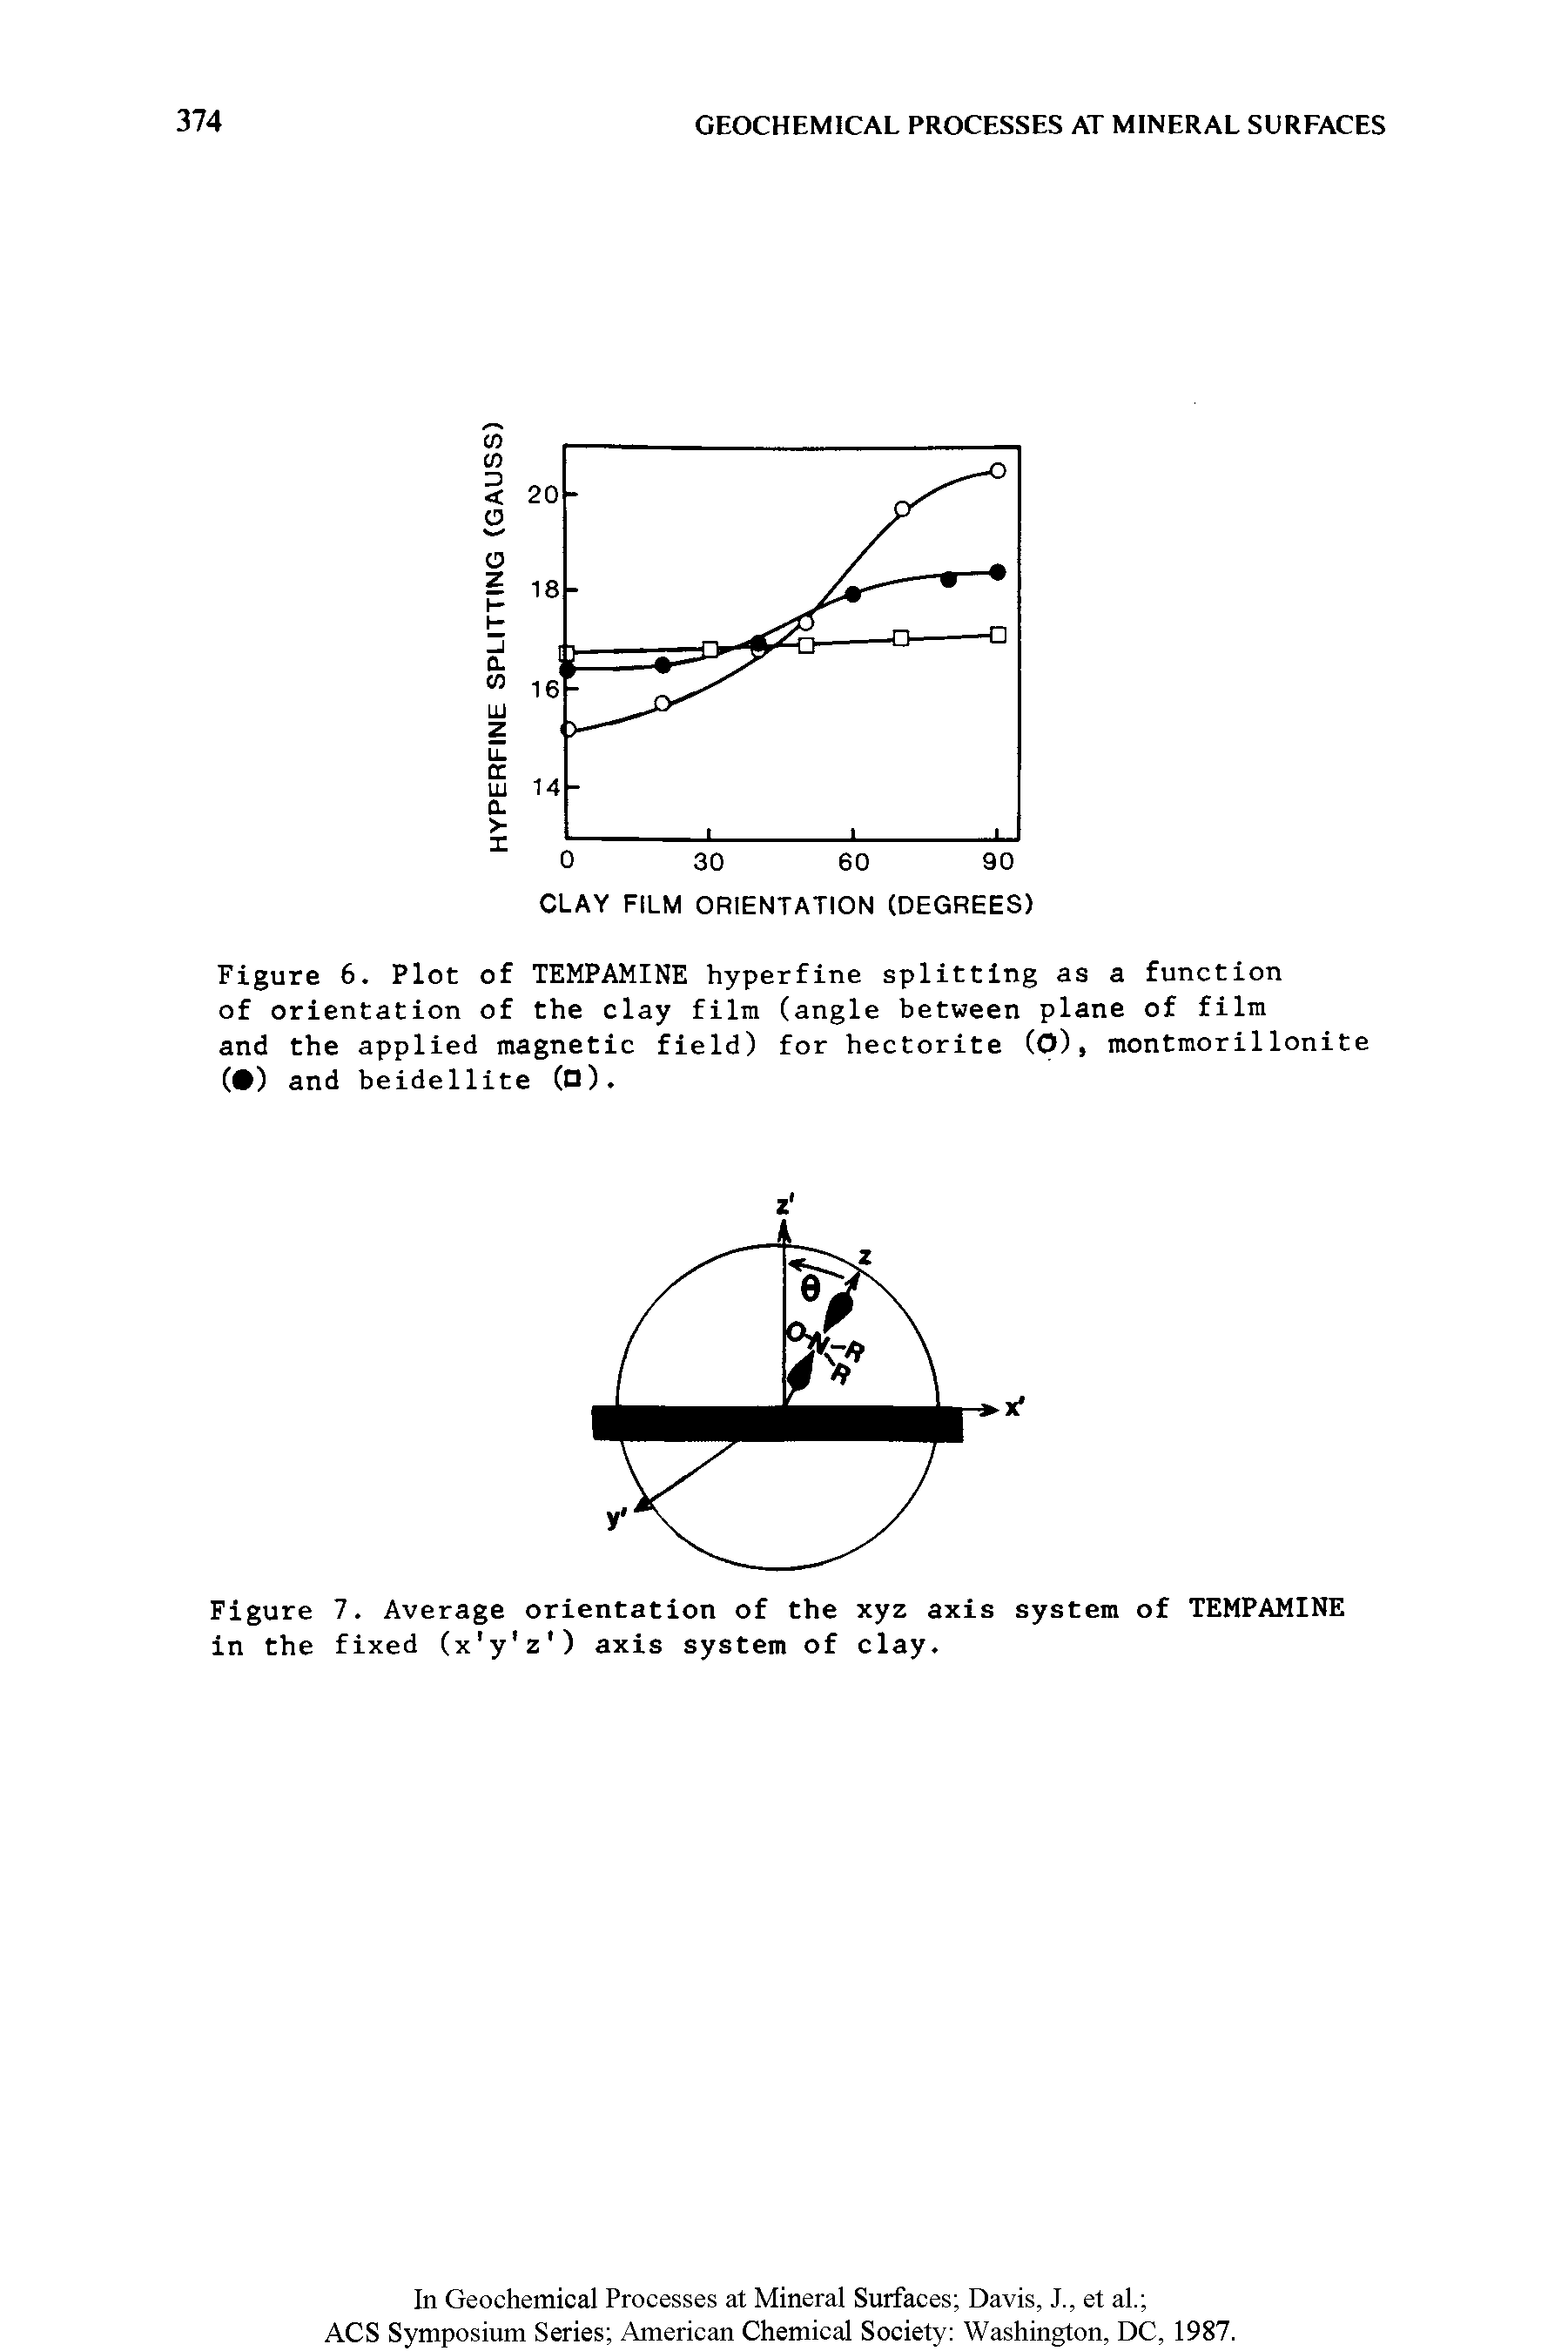 Figure 6. Plot of TEMPAMINE hyperfine splitting as a function of orientation of the clay film (angle between plane of film and the applied magnetic field) for hectorite (O), montmorilIonite ( ) and beidellite (n).